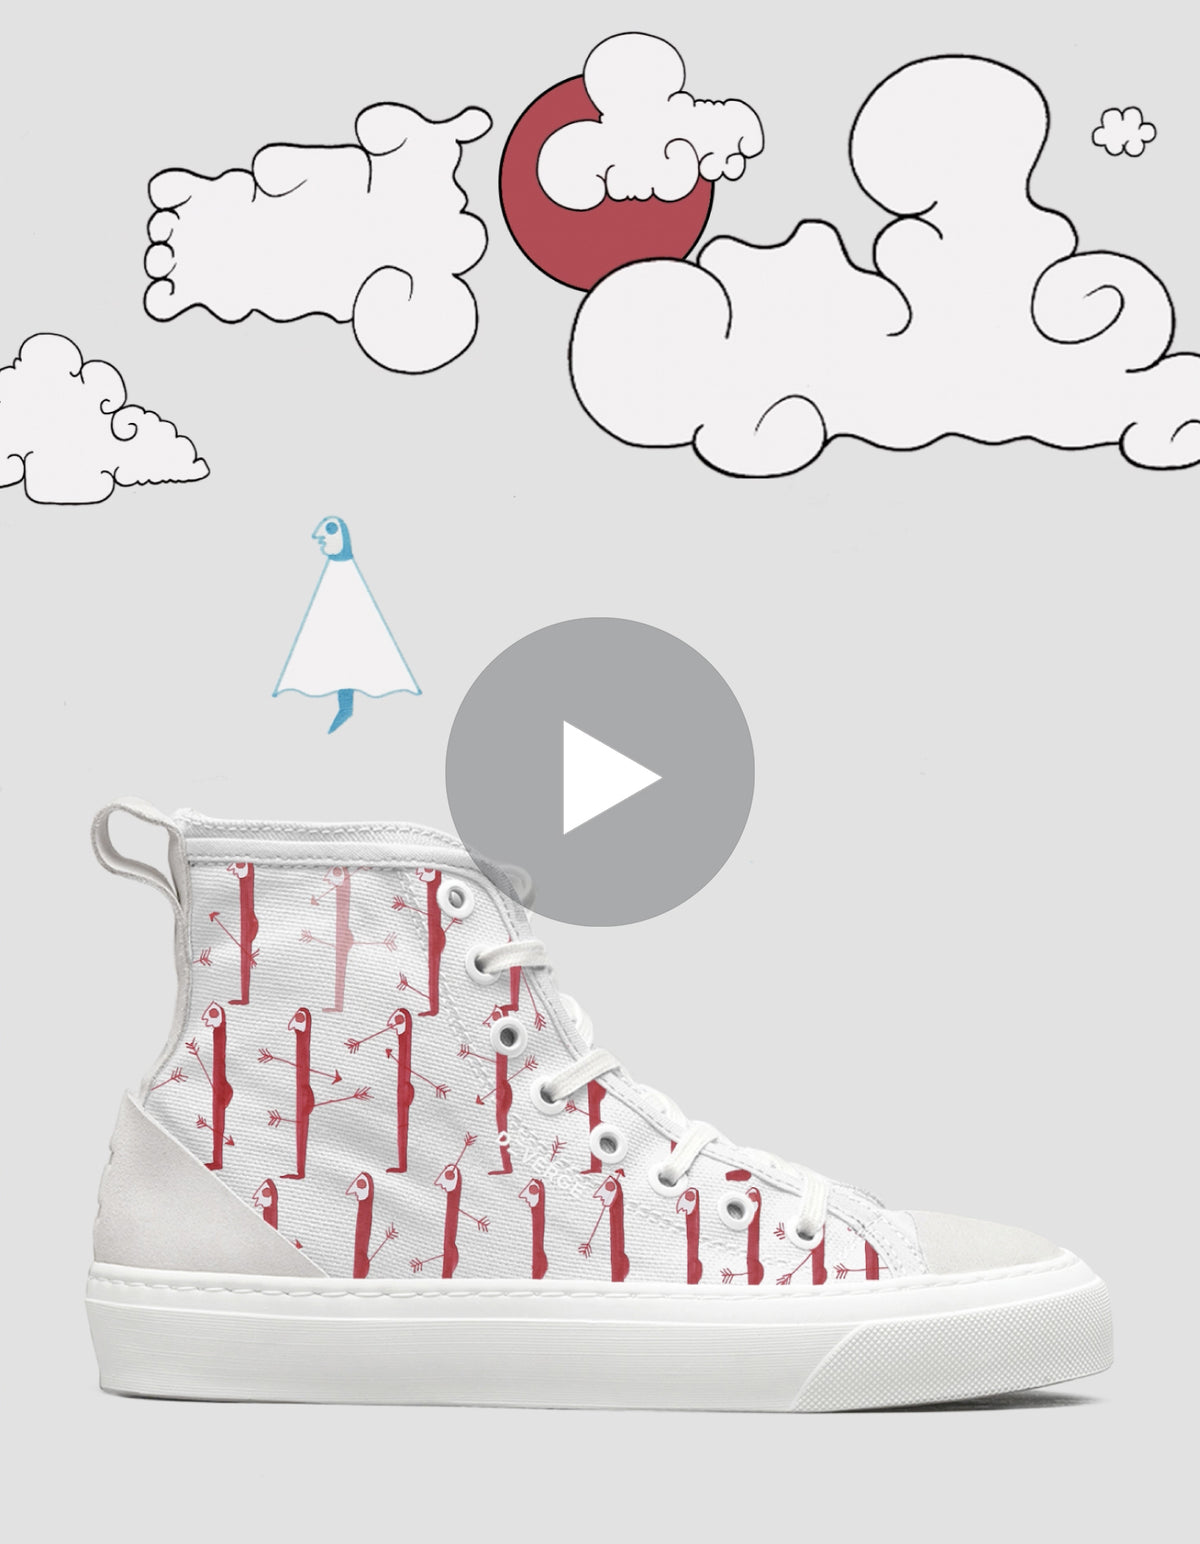 A creative image featuring A Blissful Death 5/5 with red anchor patterns, cartoonish cloud designs in the background, and a play button overlay at the center.